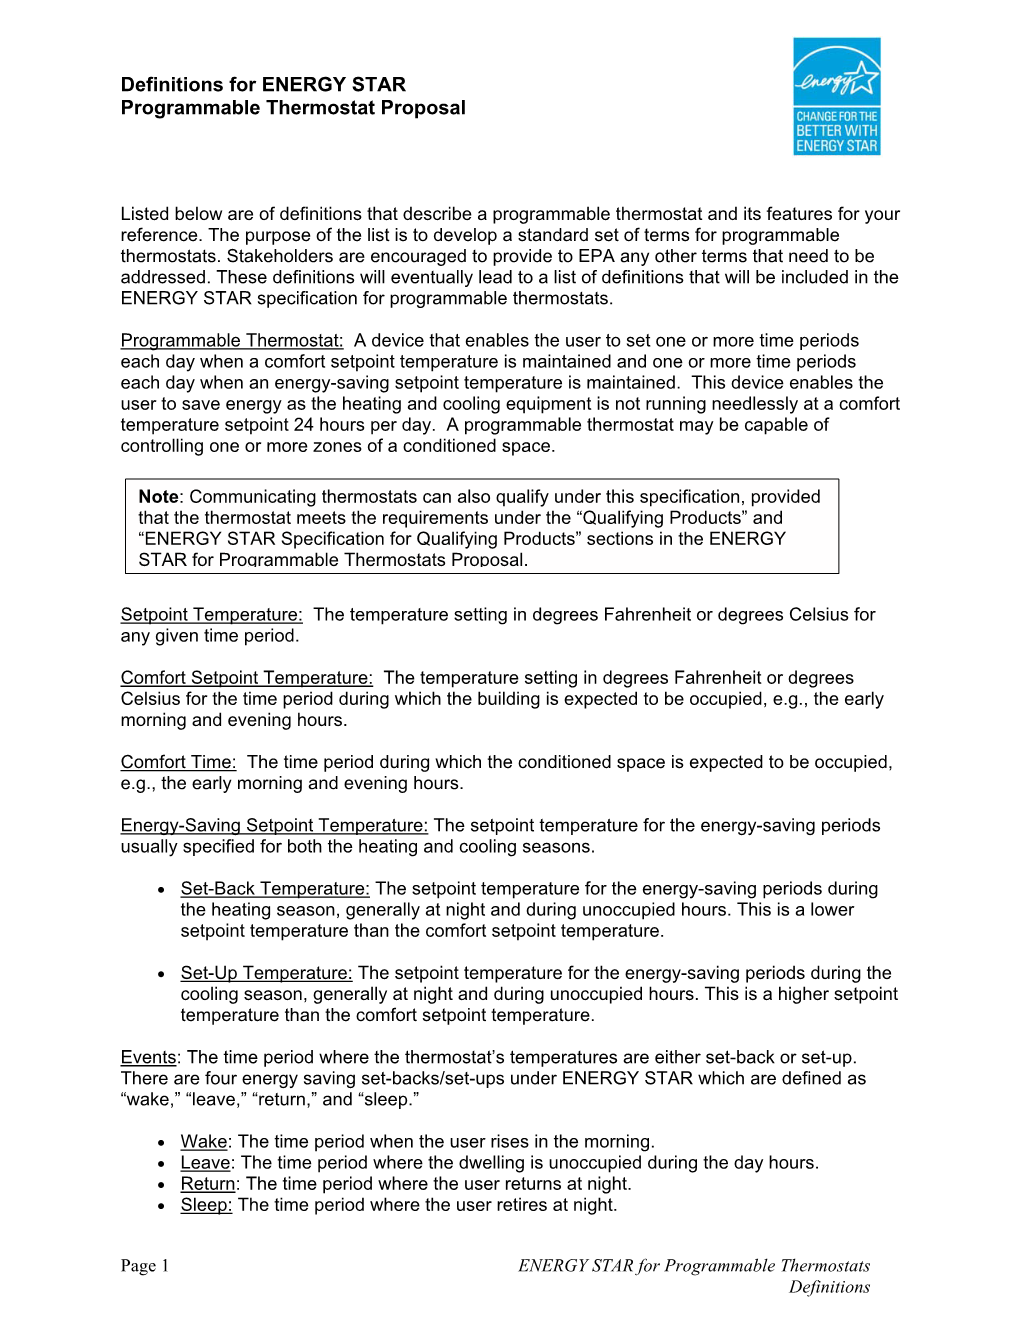 Definitions for ENERGY STAR Programmable Thermostat Proposal